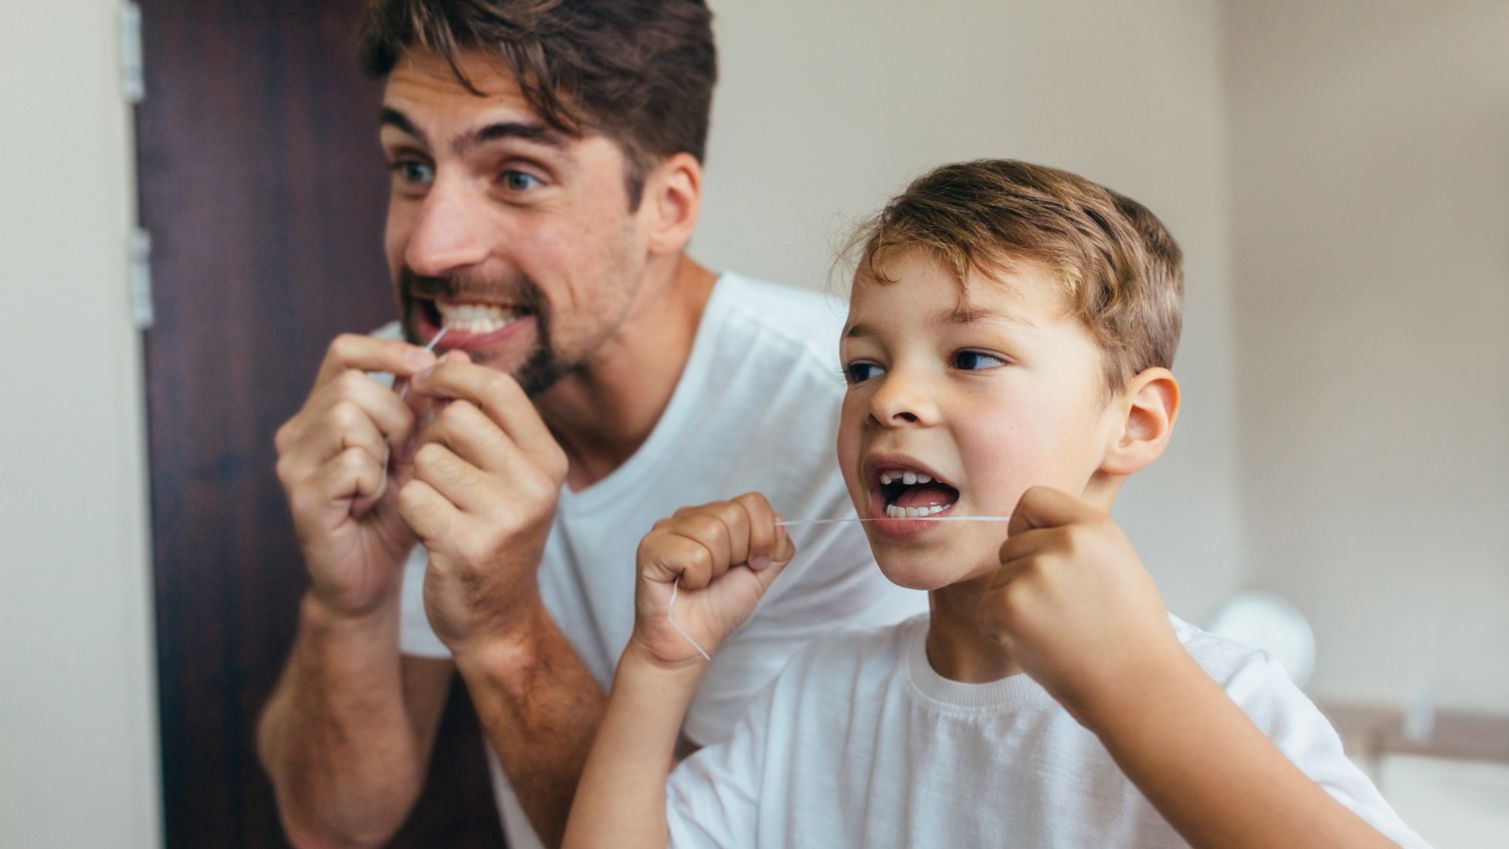 Father and son flossing their teeth together.